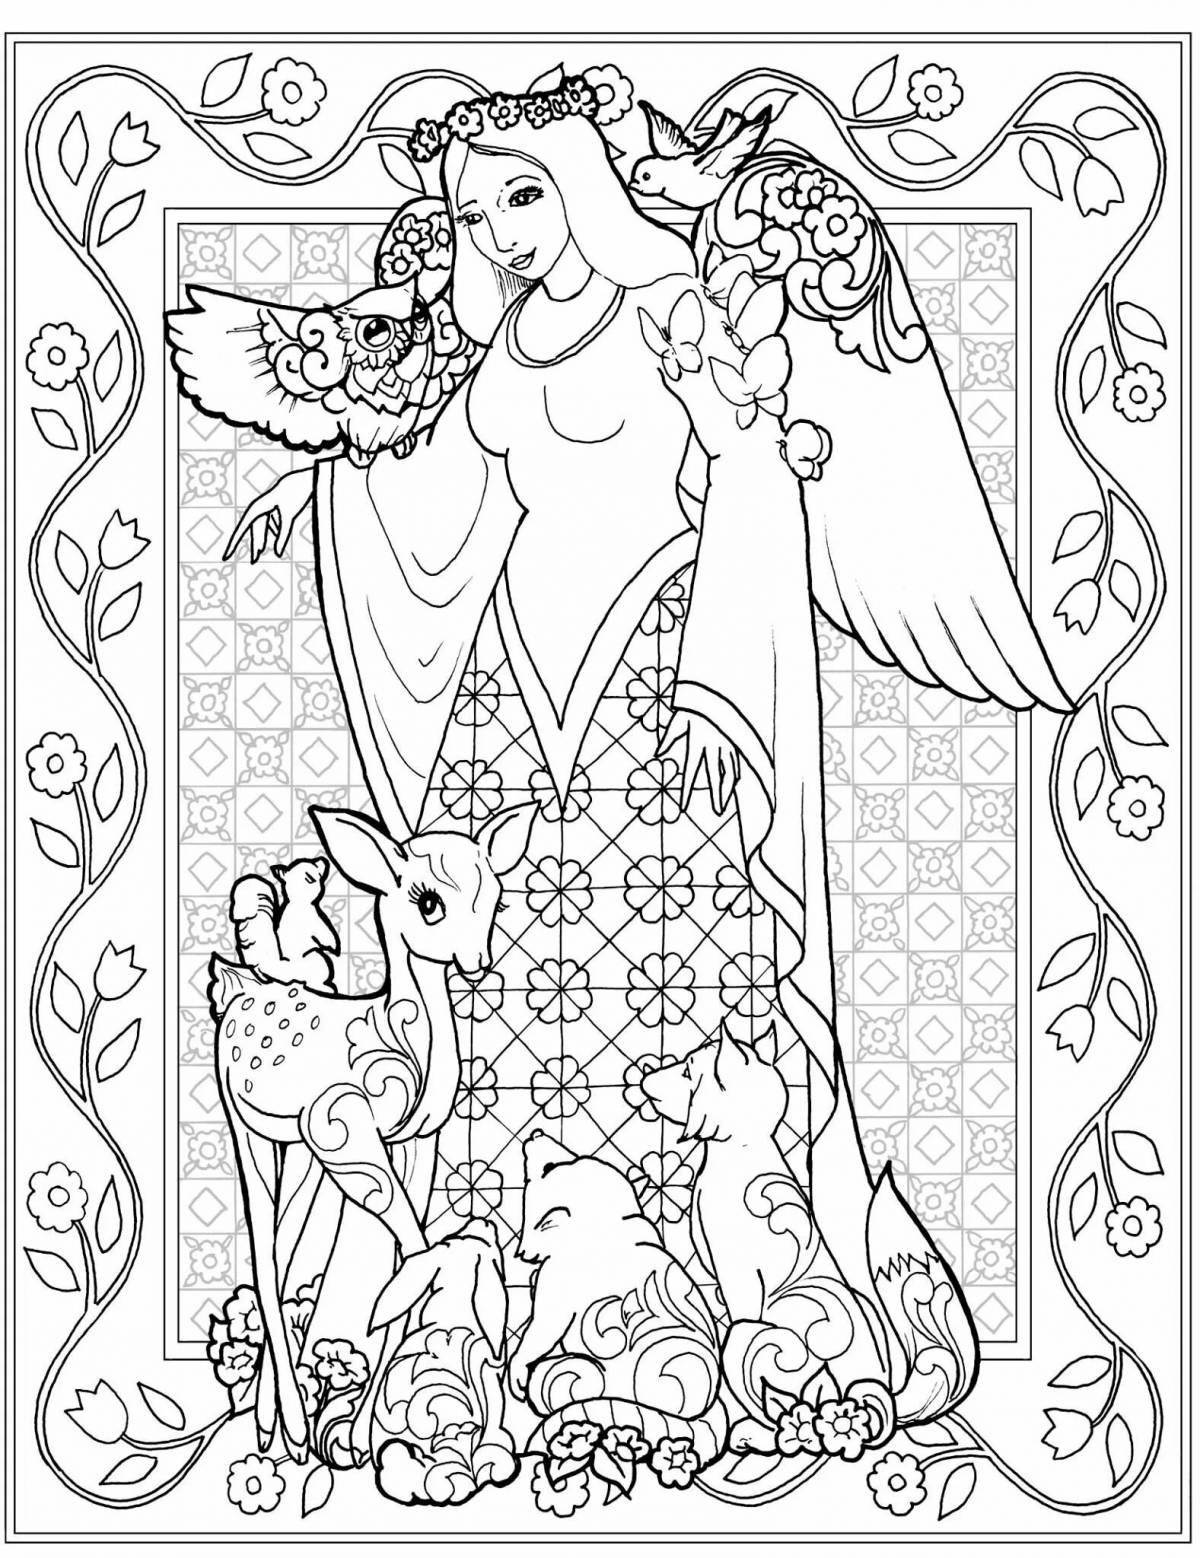 Coloring book peaceful angel antistress